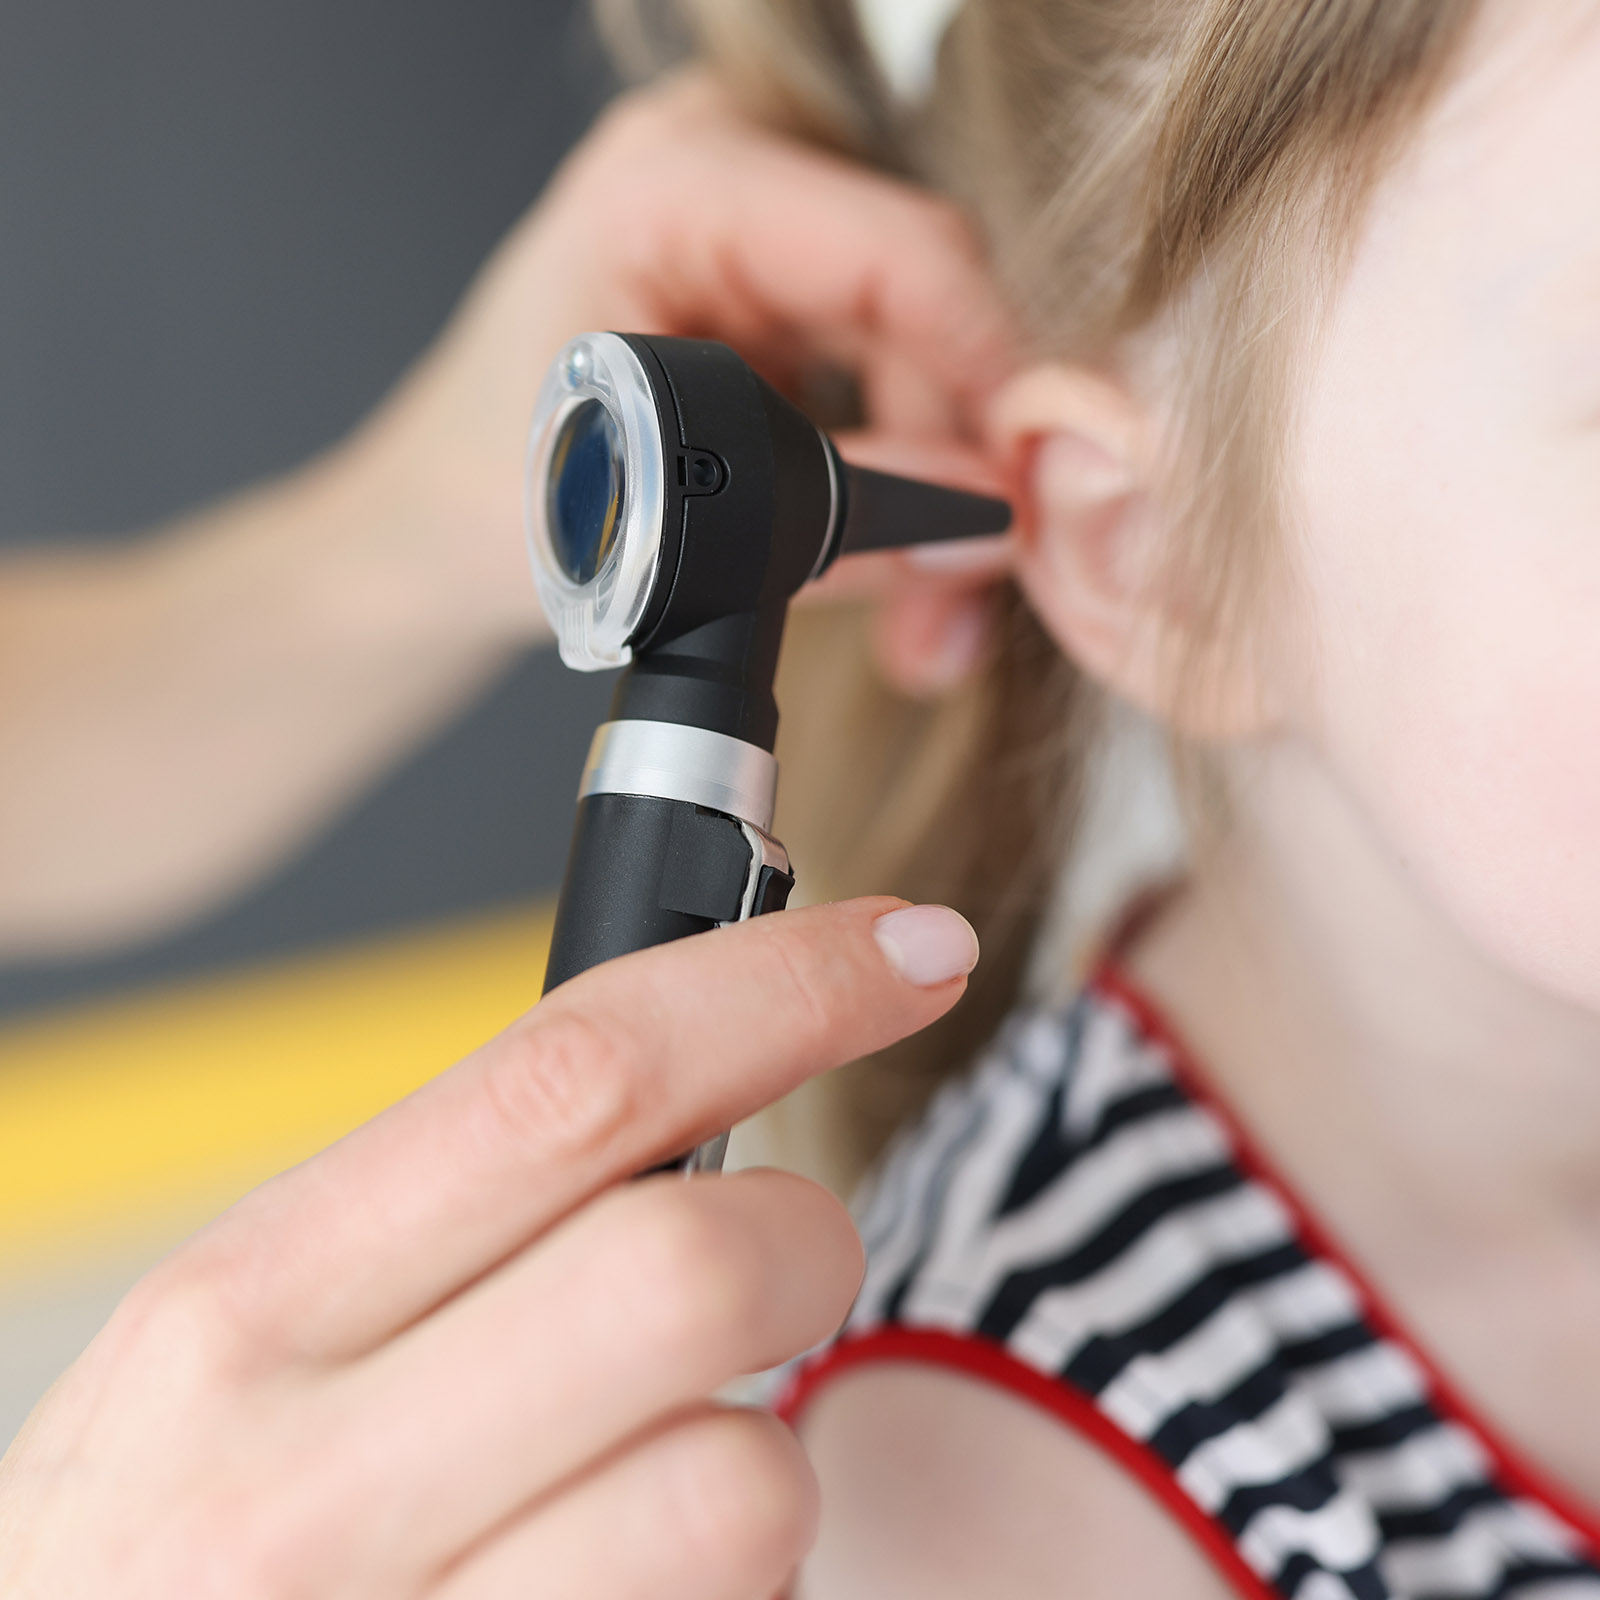 Medicaid doctor examines a young girl’s ear